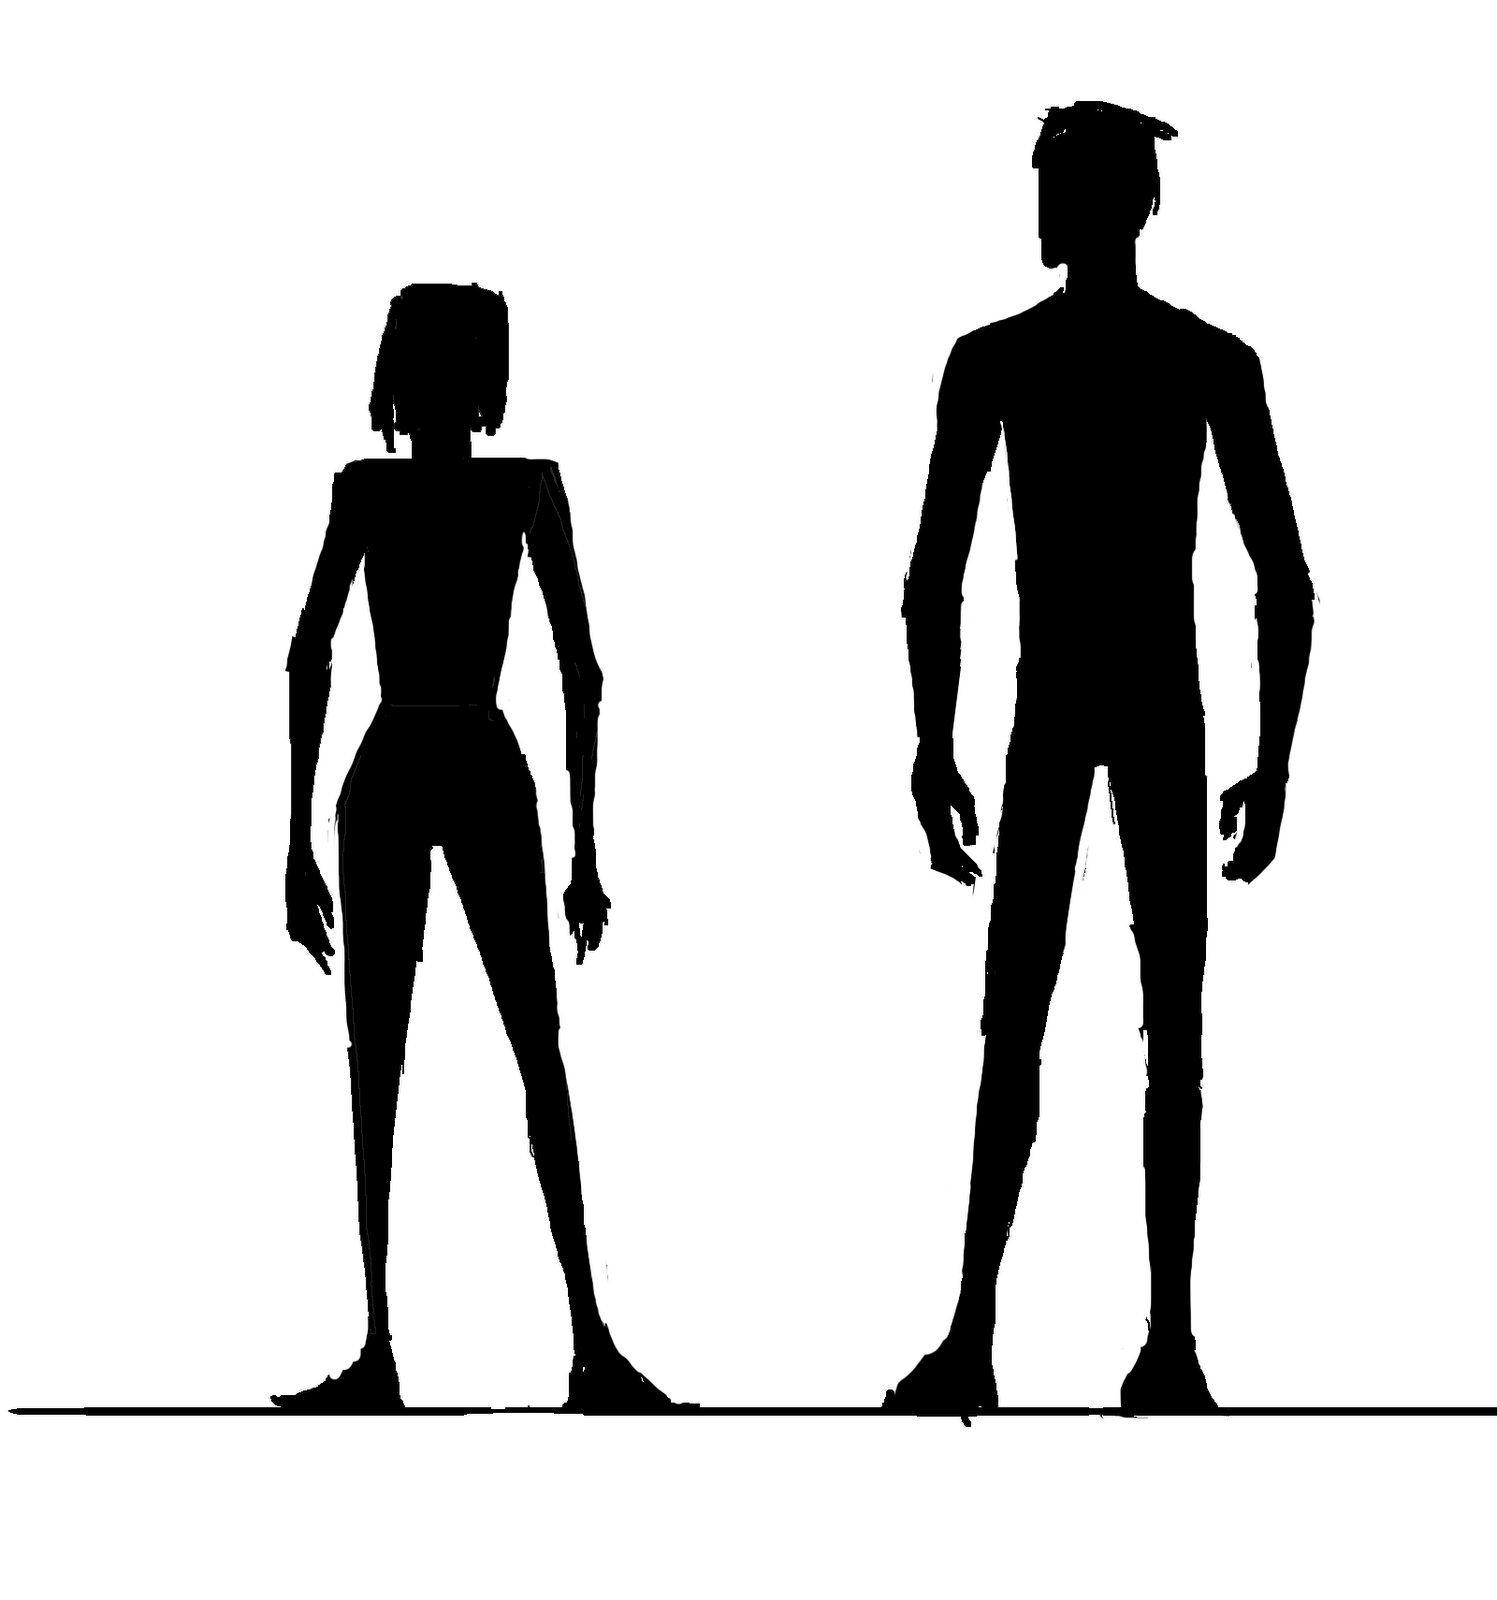 12 Female Body Silhouette Free Cliparts That You Can Download To You